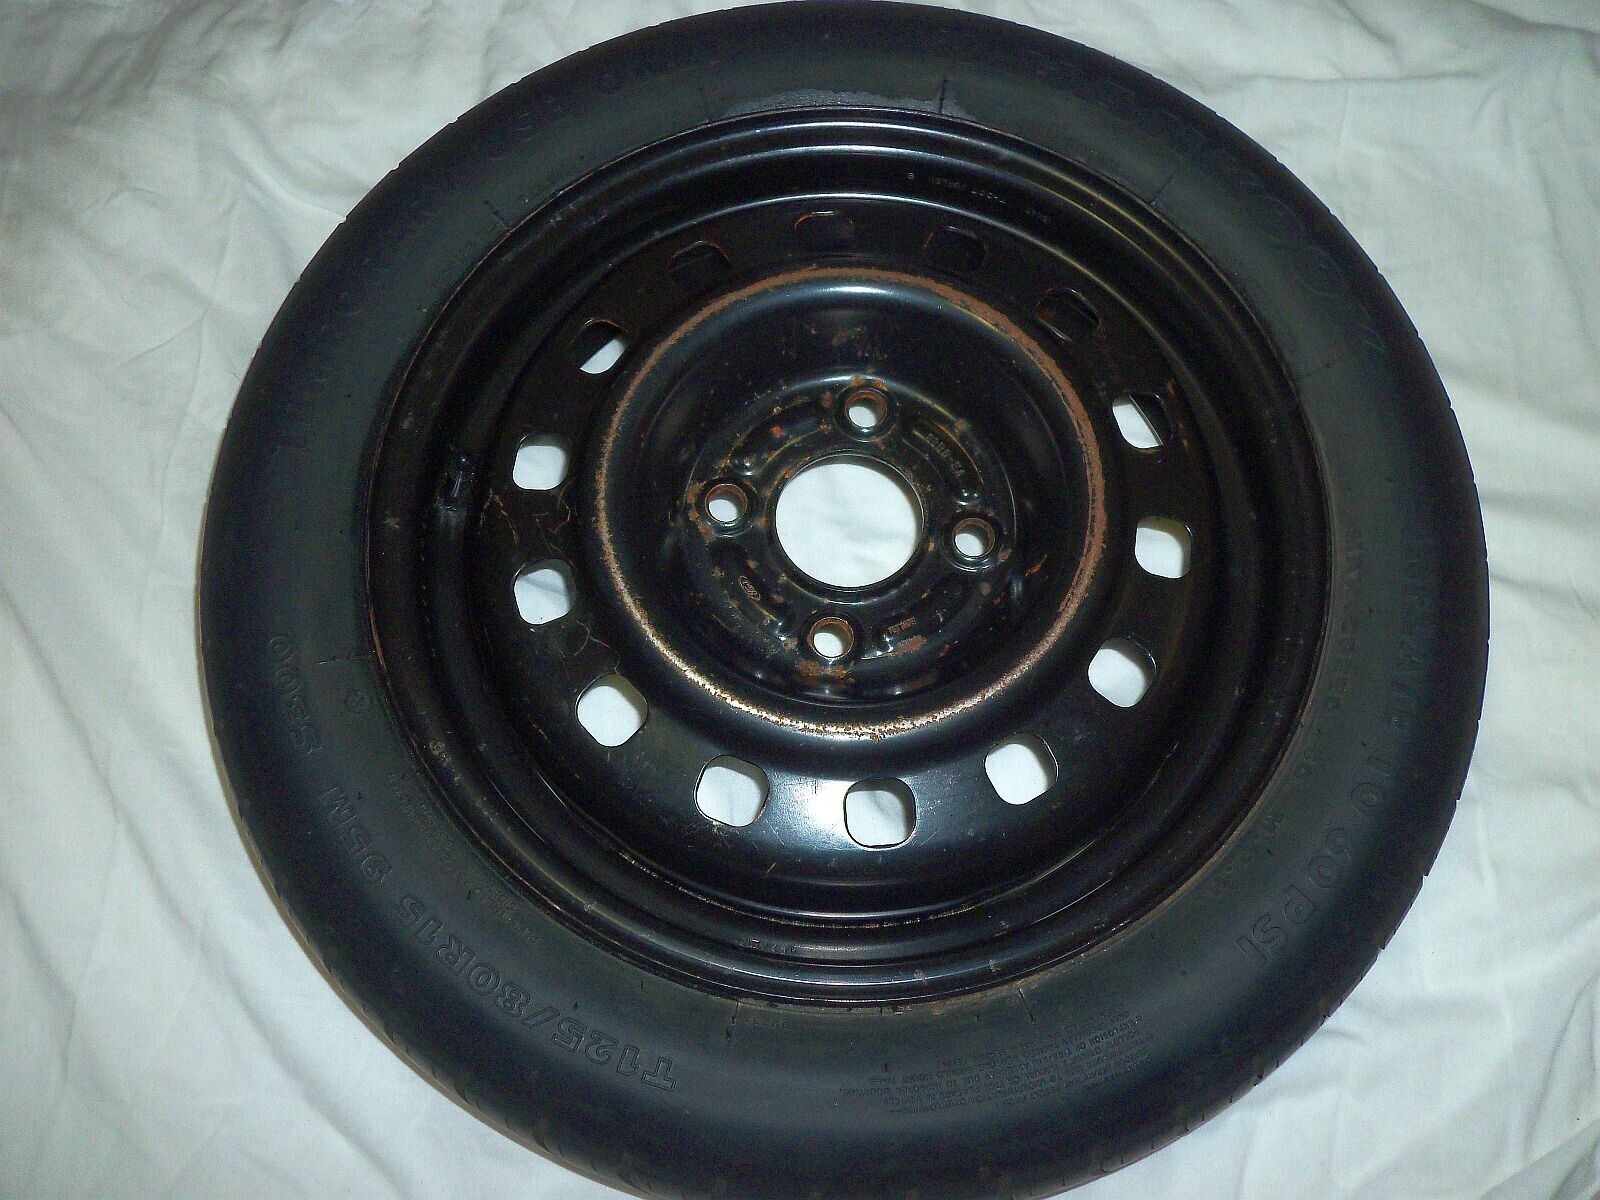 2005 Ford Focus Spare Tire Compact Donut T125/80R15 95M S300